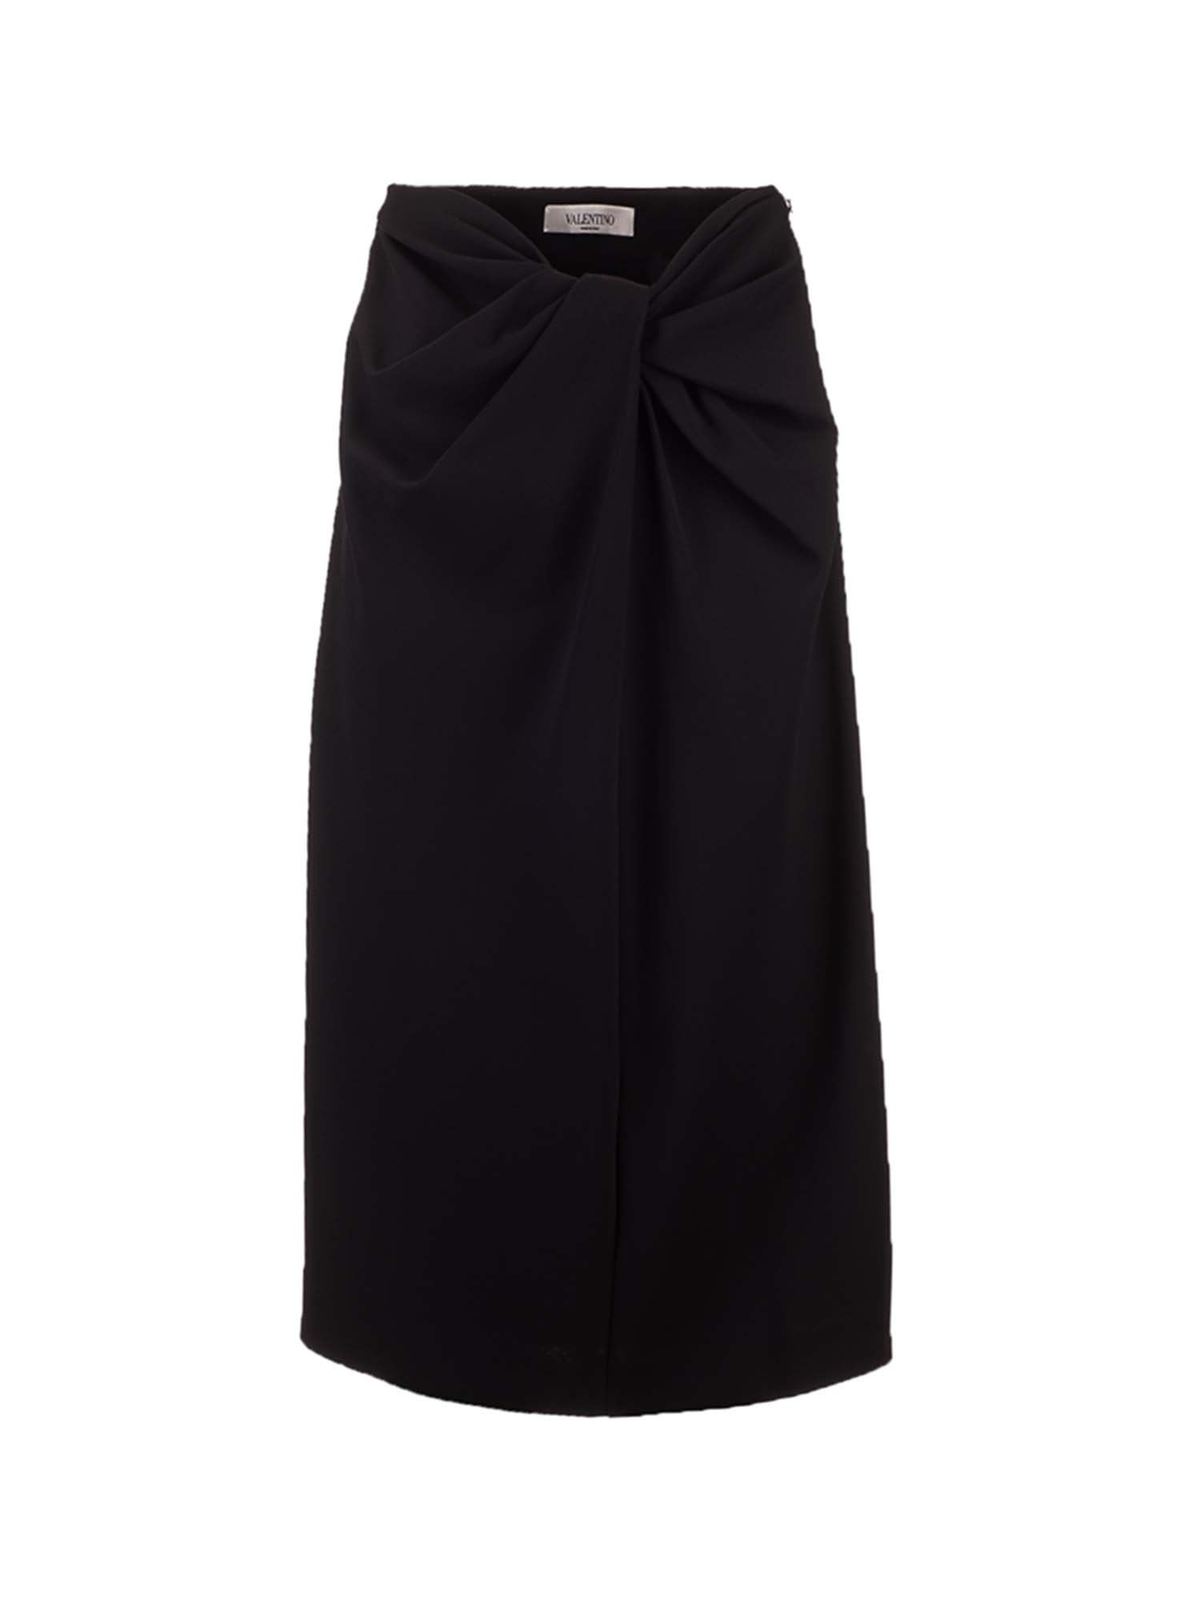 Valentino Knotted Skirt In Black